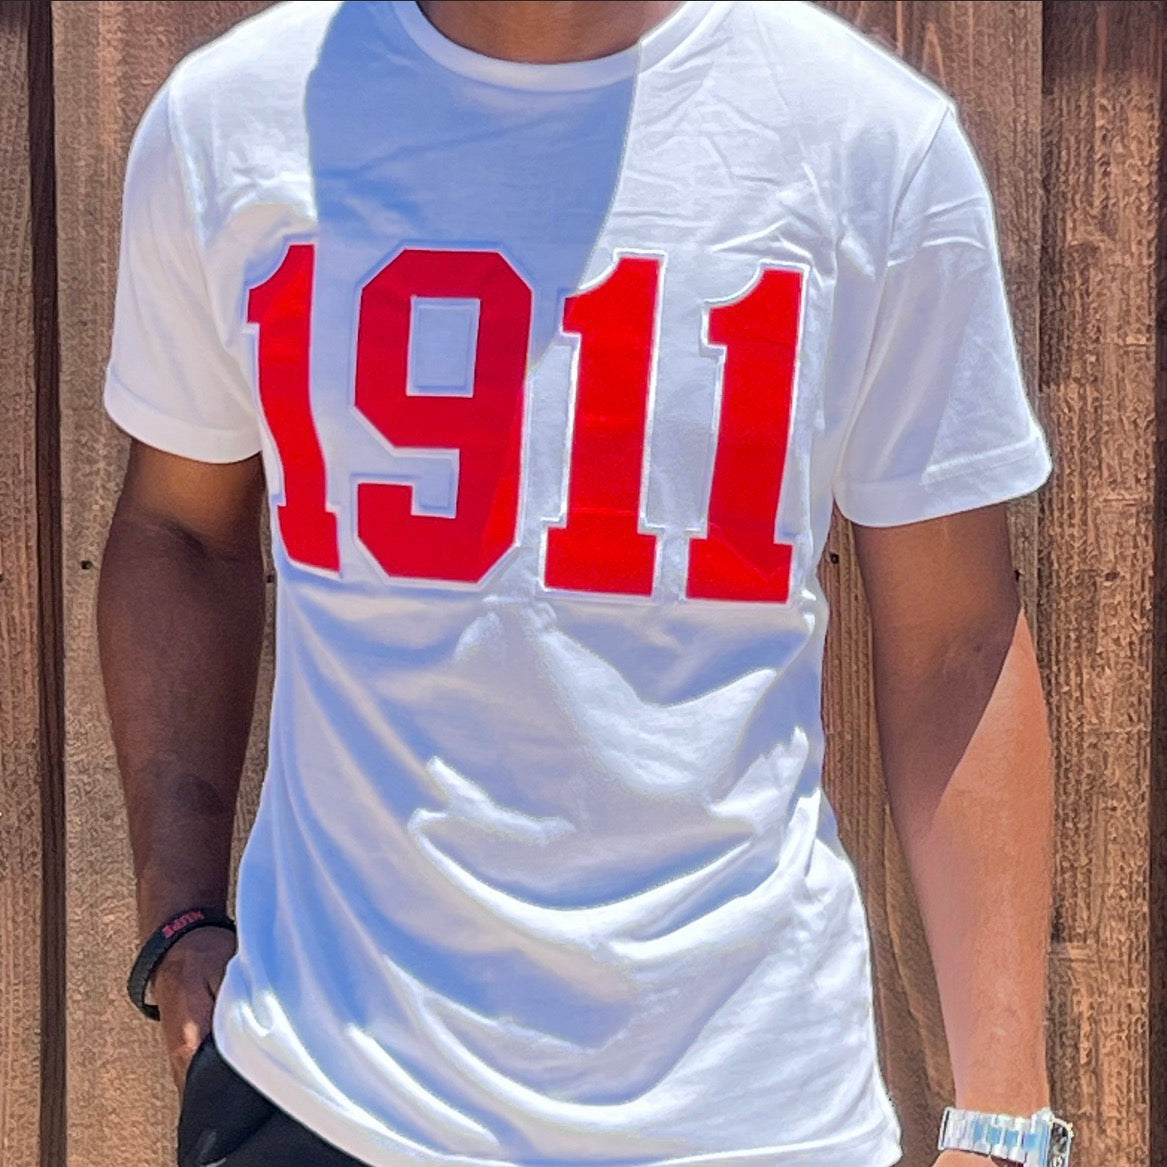 Kappa Alpha Psi 1911 Embroidery T Shirt - White/ Red – Nupekave